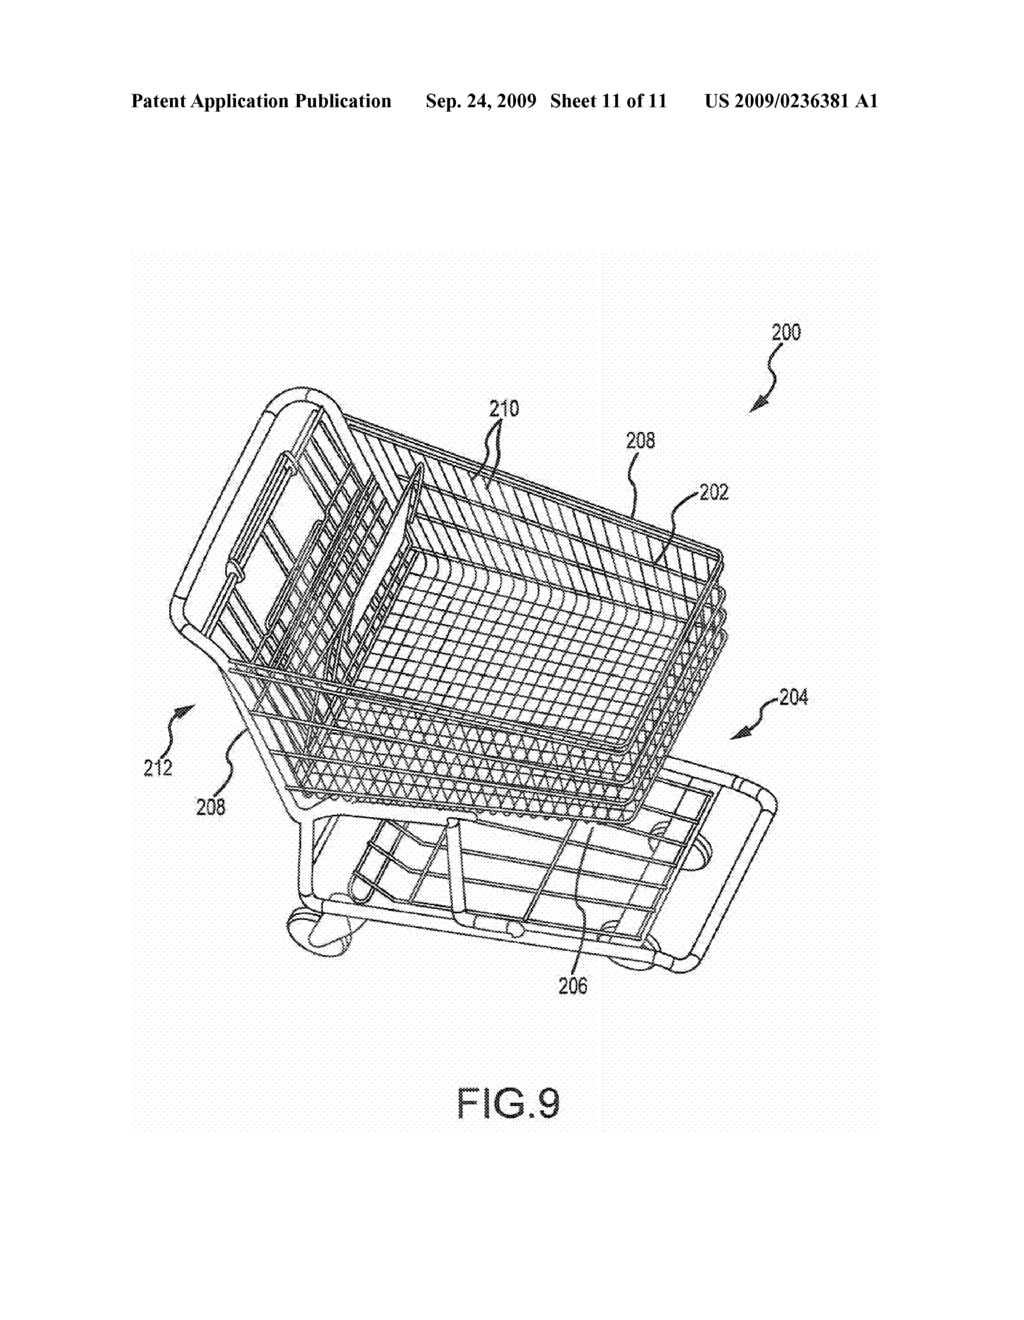 CUP HOLDER FOR SHOPPING CARTS THAT RETRACTS INTO THE BASKET OF THE SHOPPING CART - diagram, schematic, and image 12